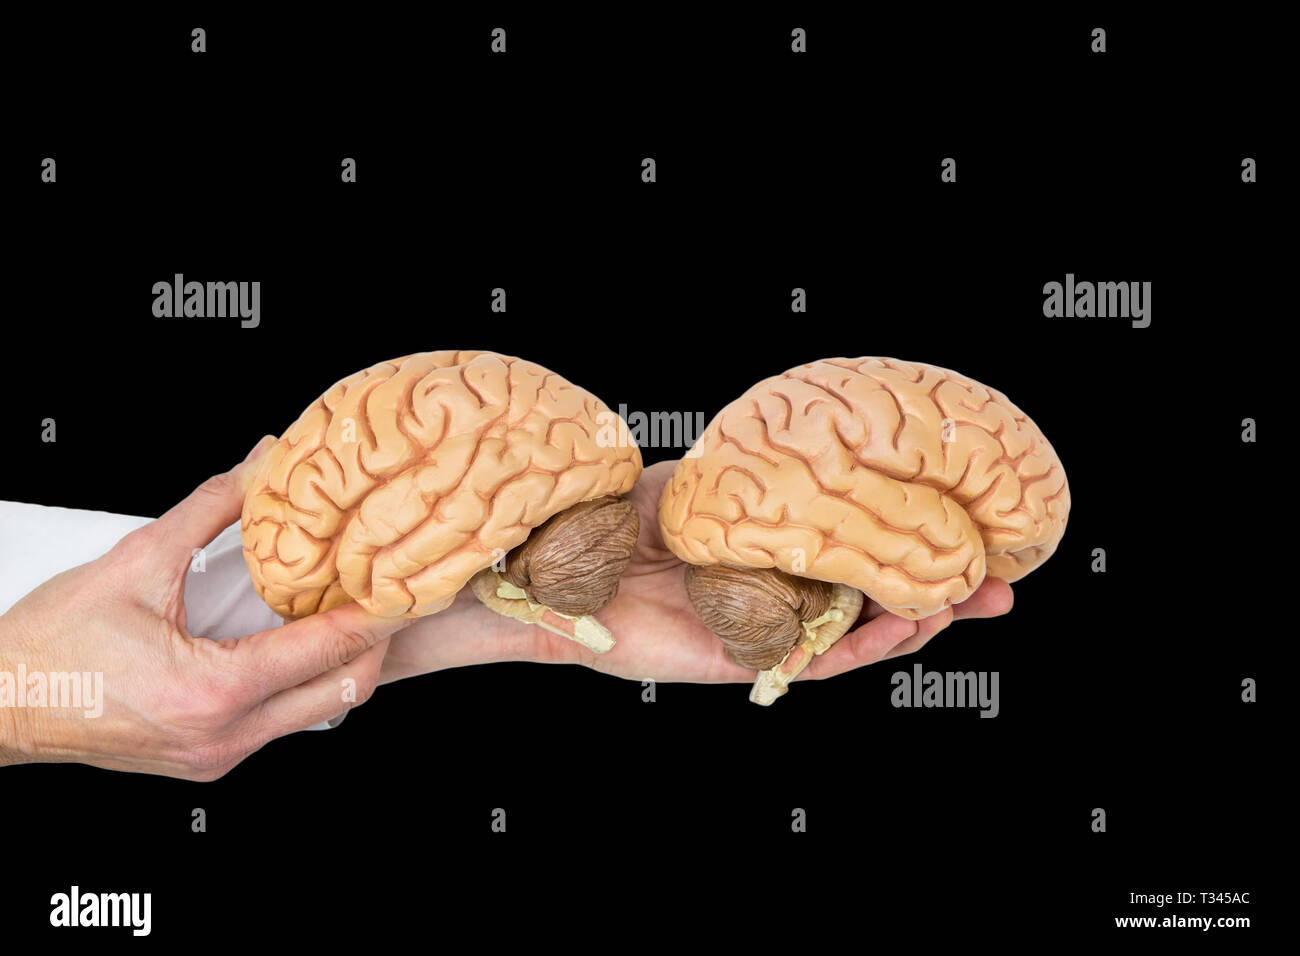 Hands hold human brains model isolated on black background Stock Photo